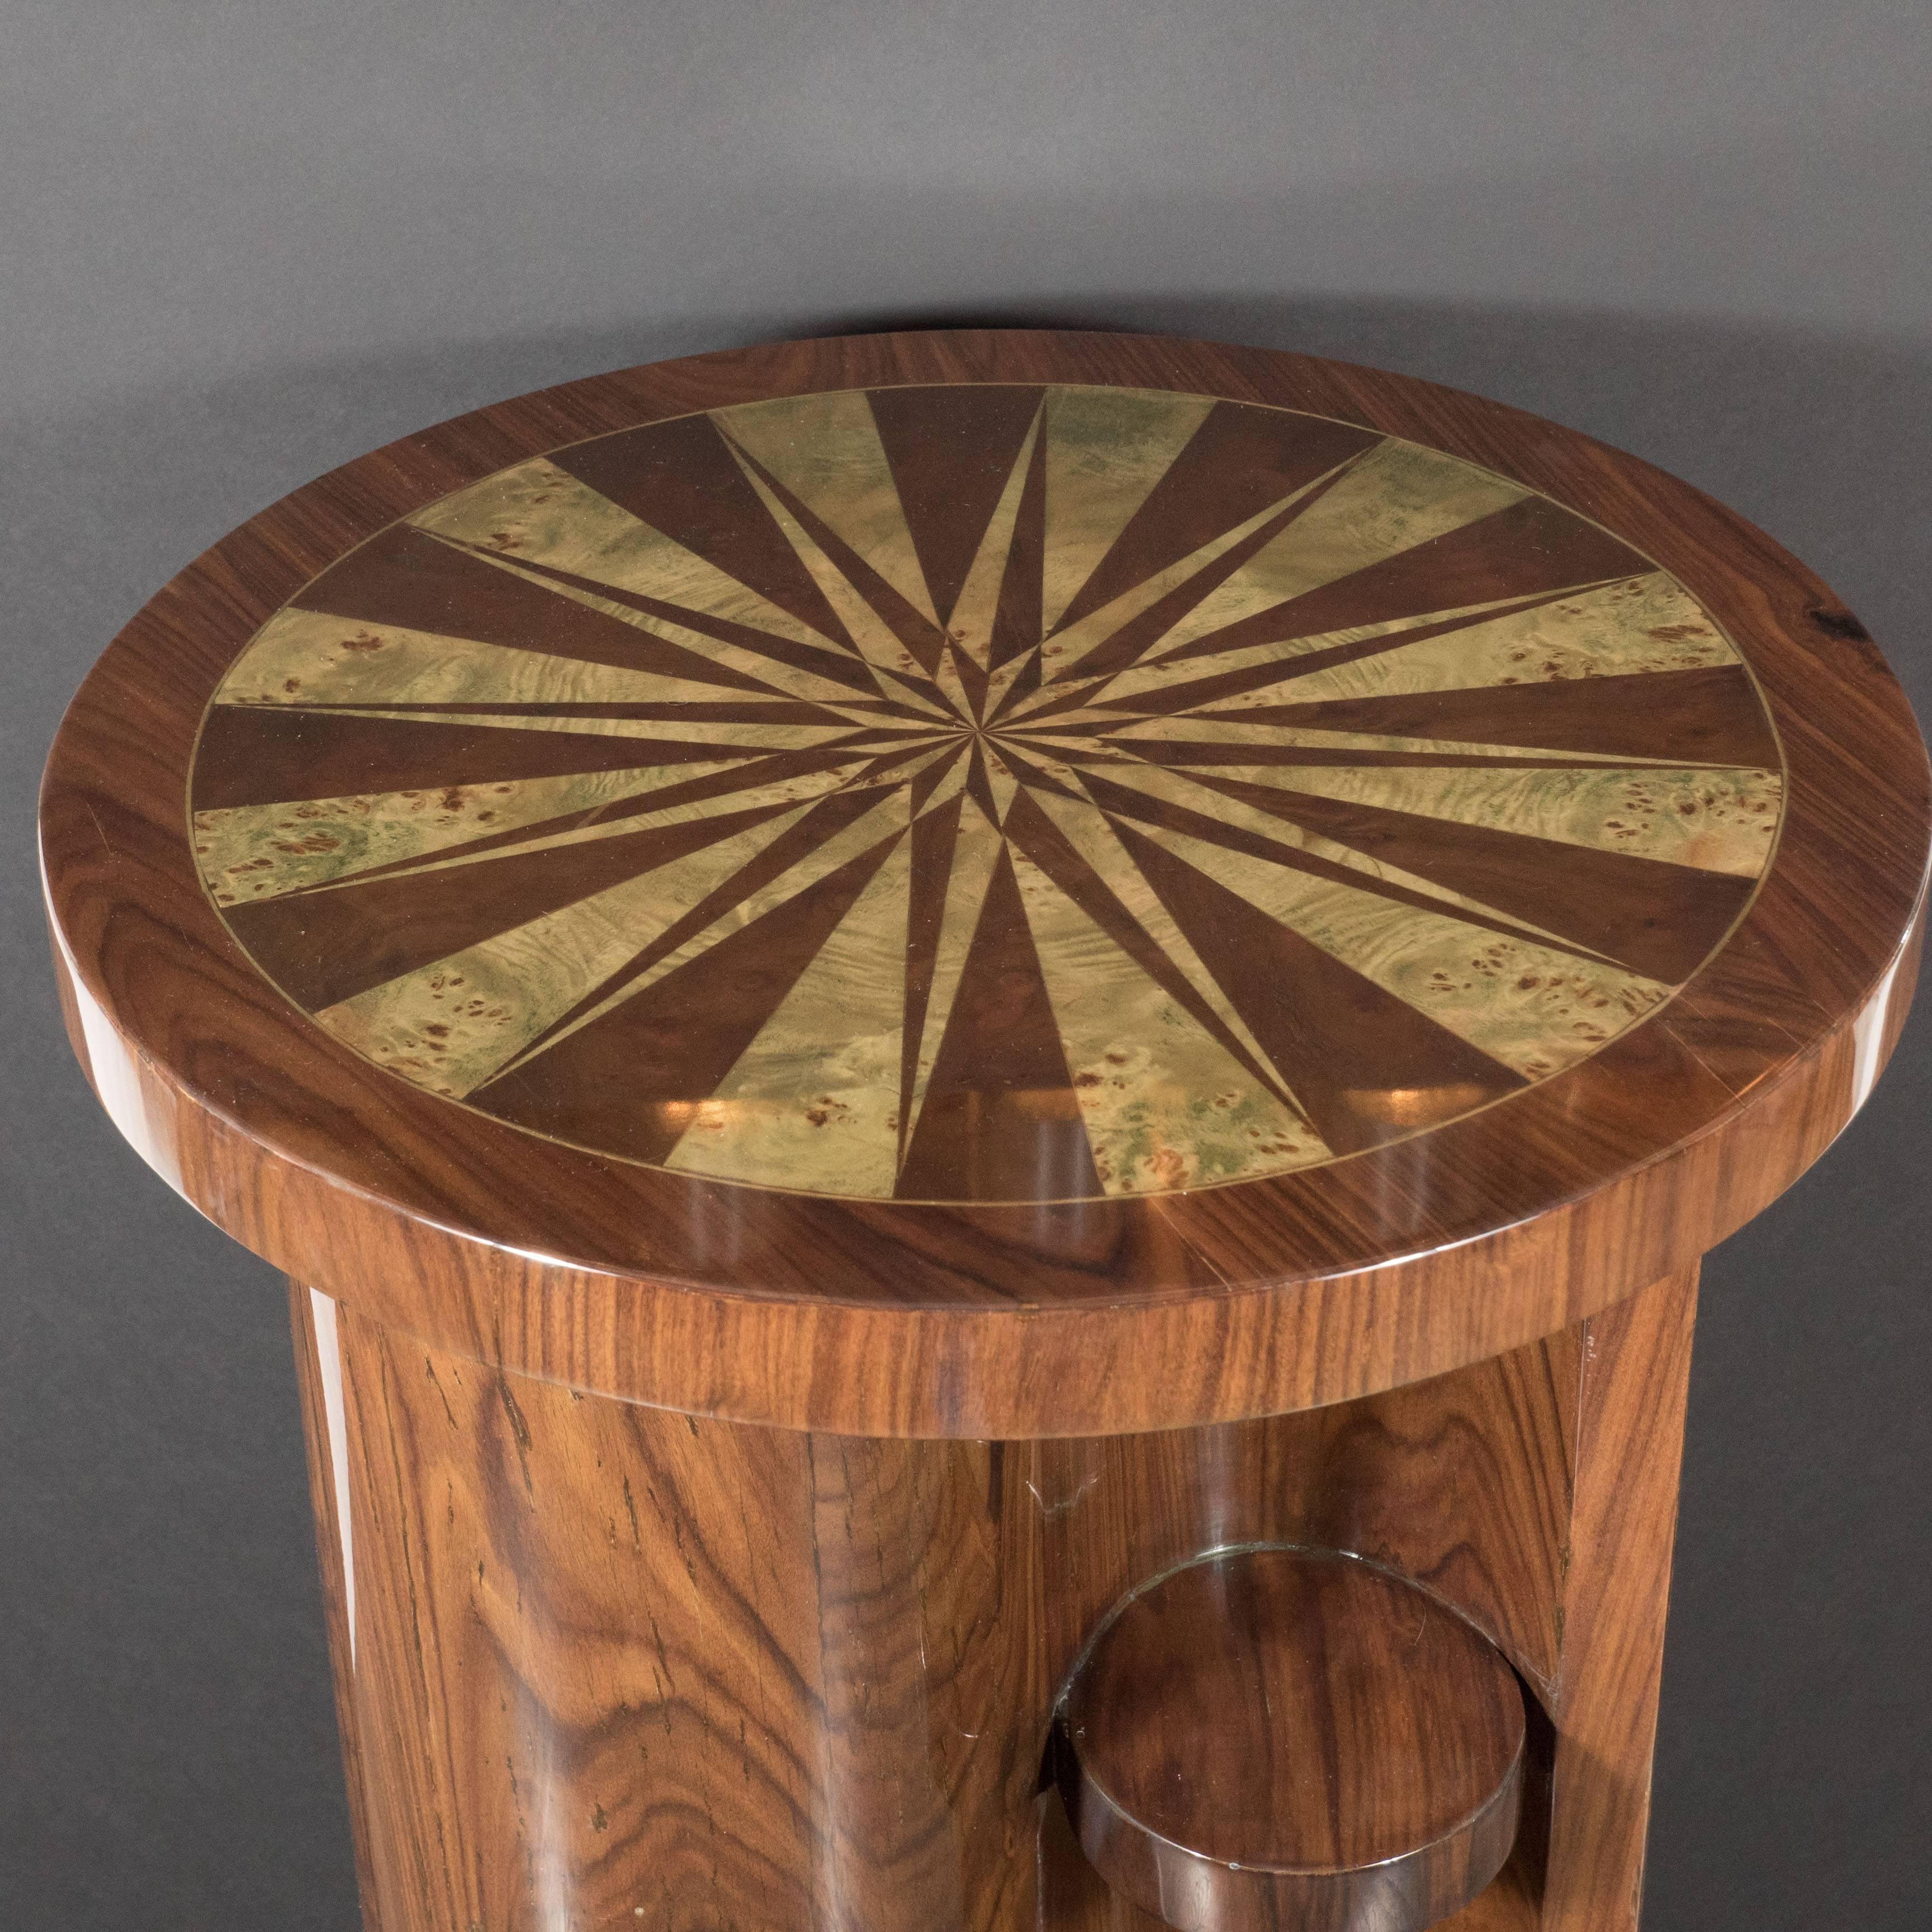 Art Deco Inlaid Starburst Table/ Pedestal in Bookmatched Burled Walnut & Elm For Sale 3